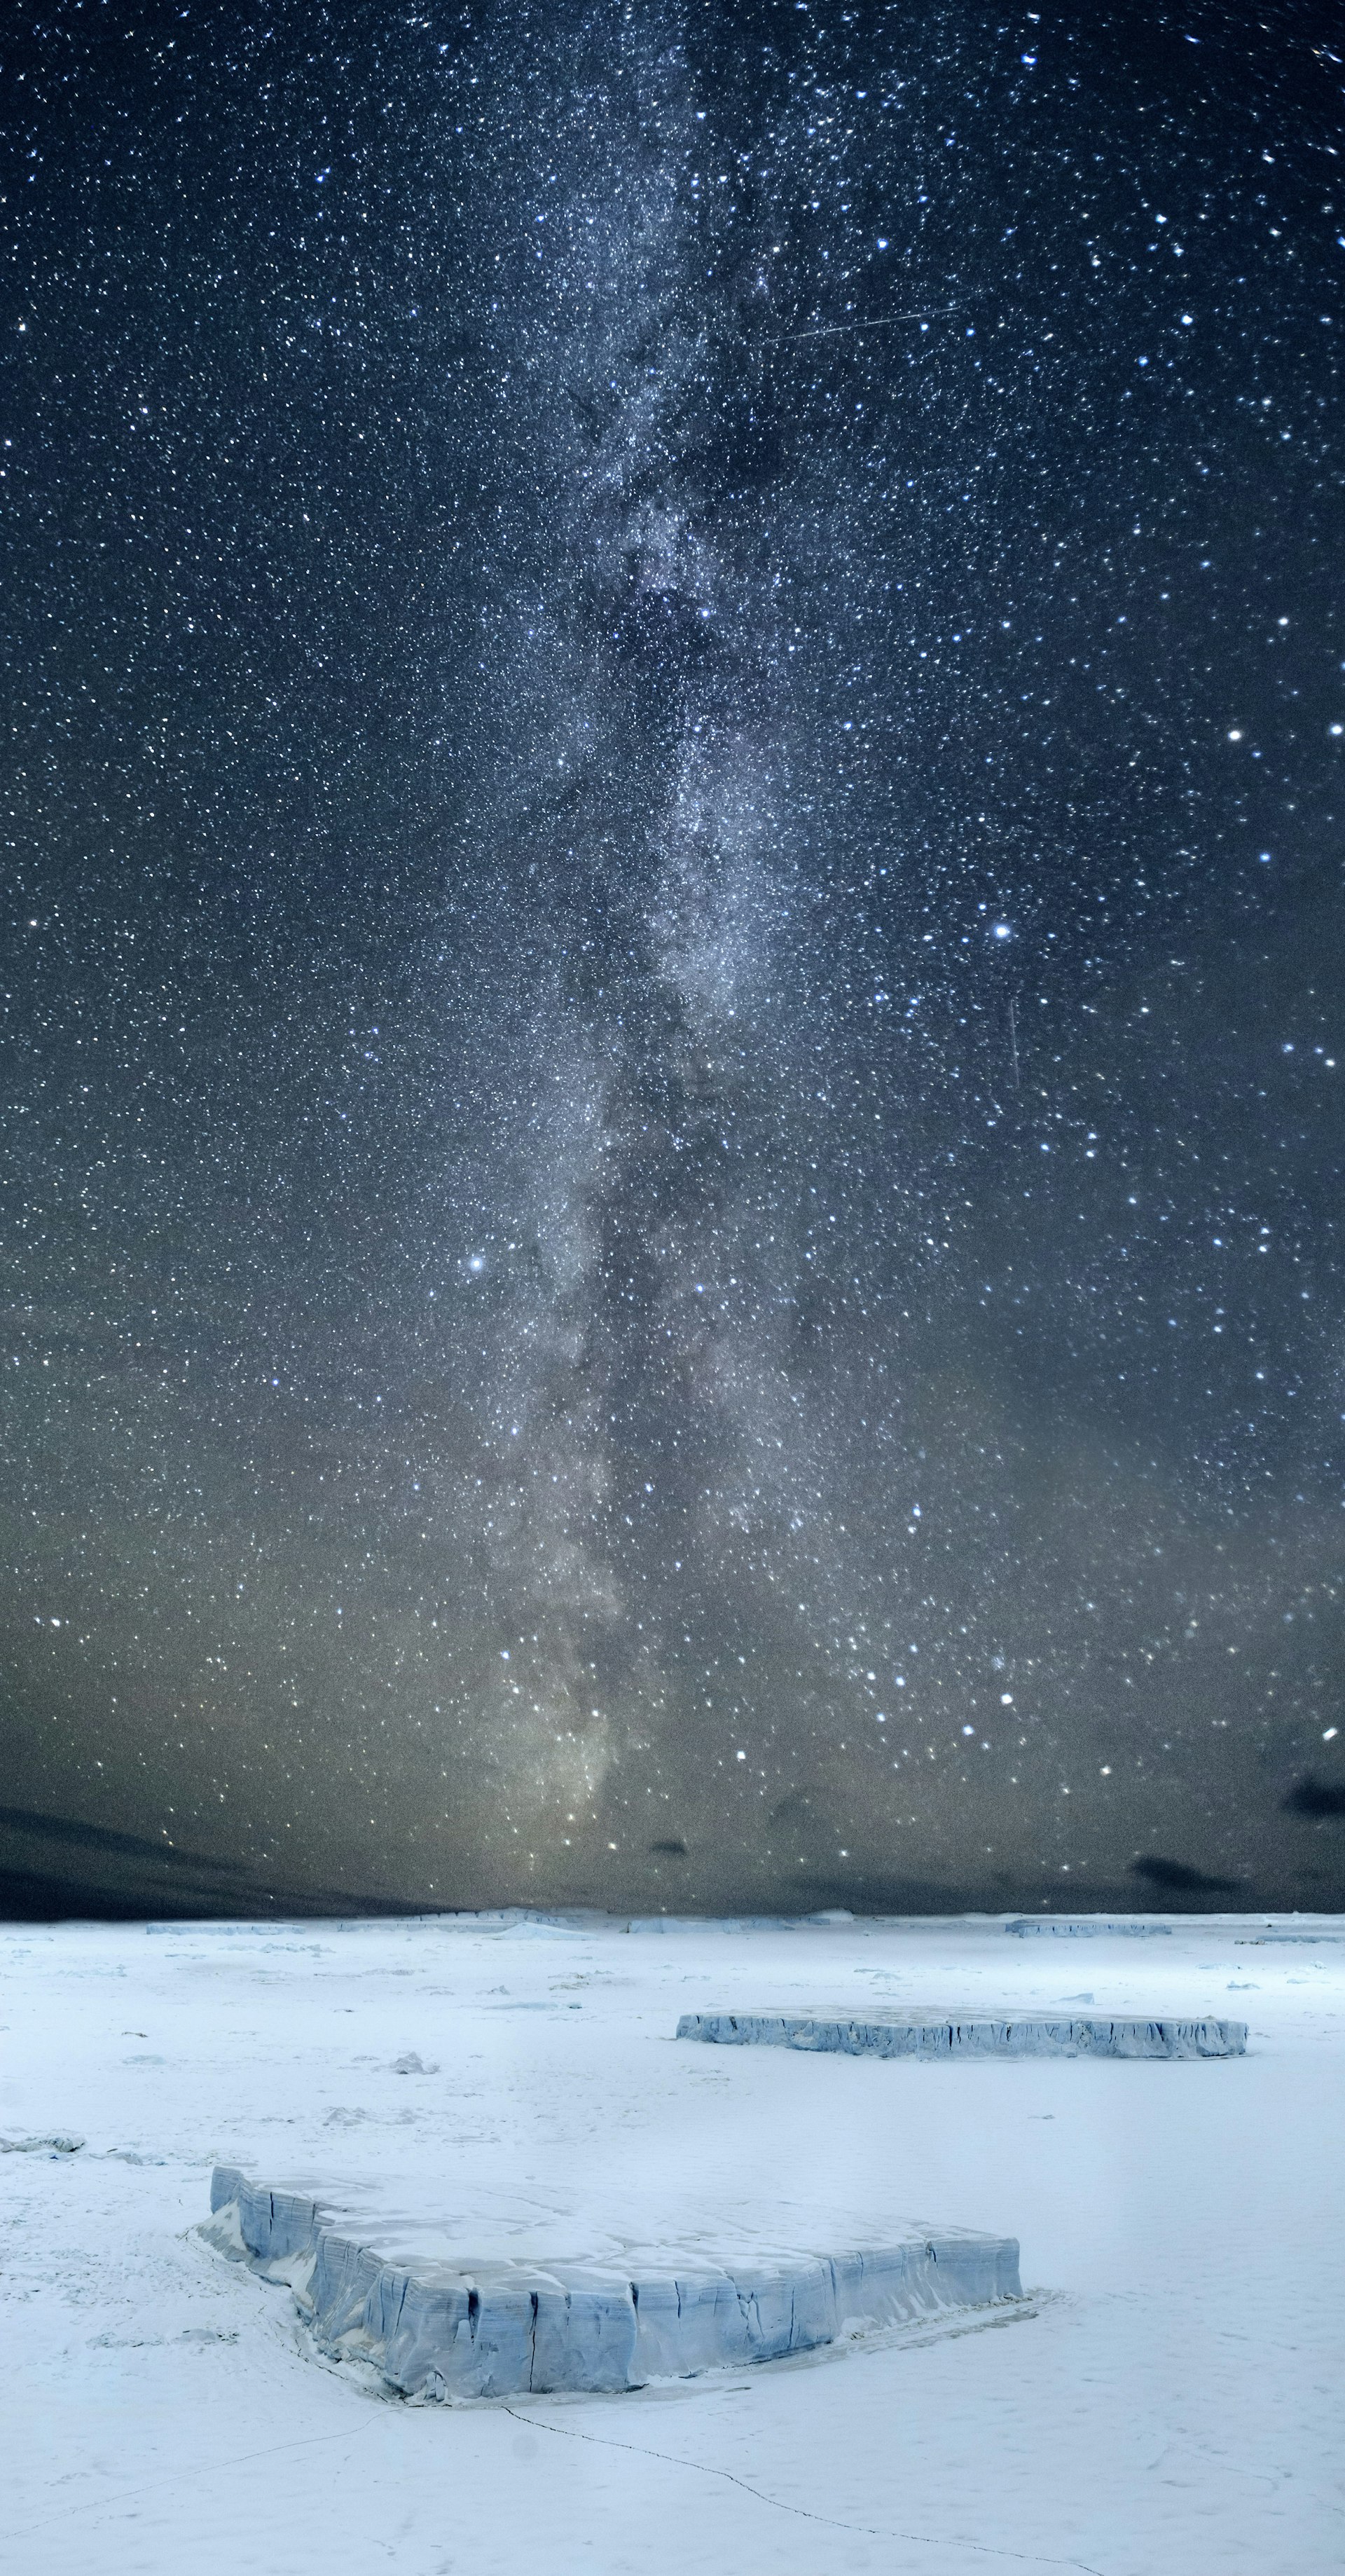 The Milky Way over Antarctica, with millions of stars in the dark sky above a white snowy landscape